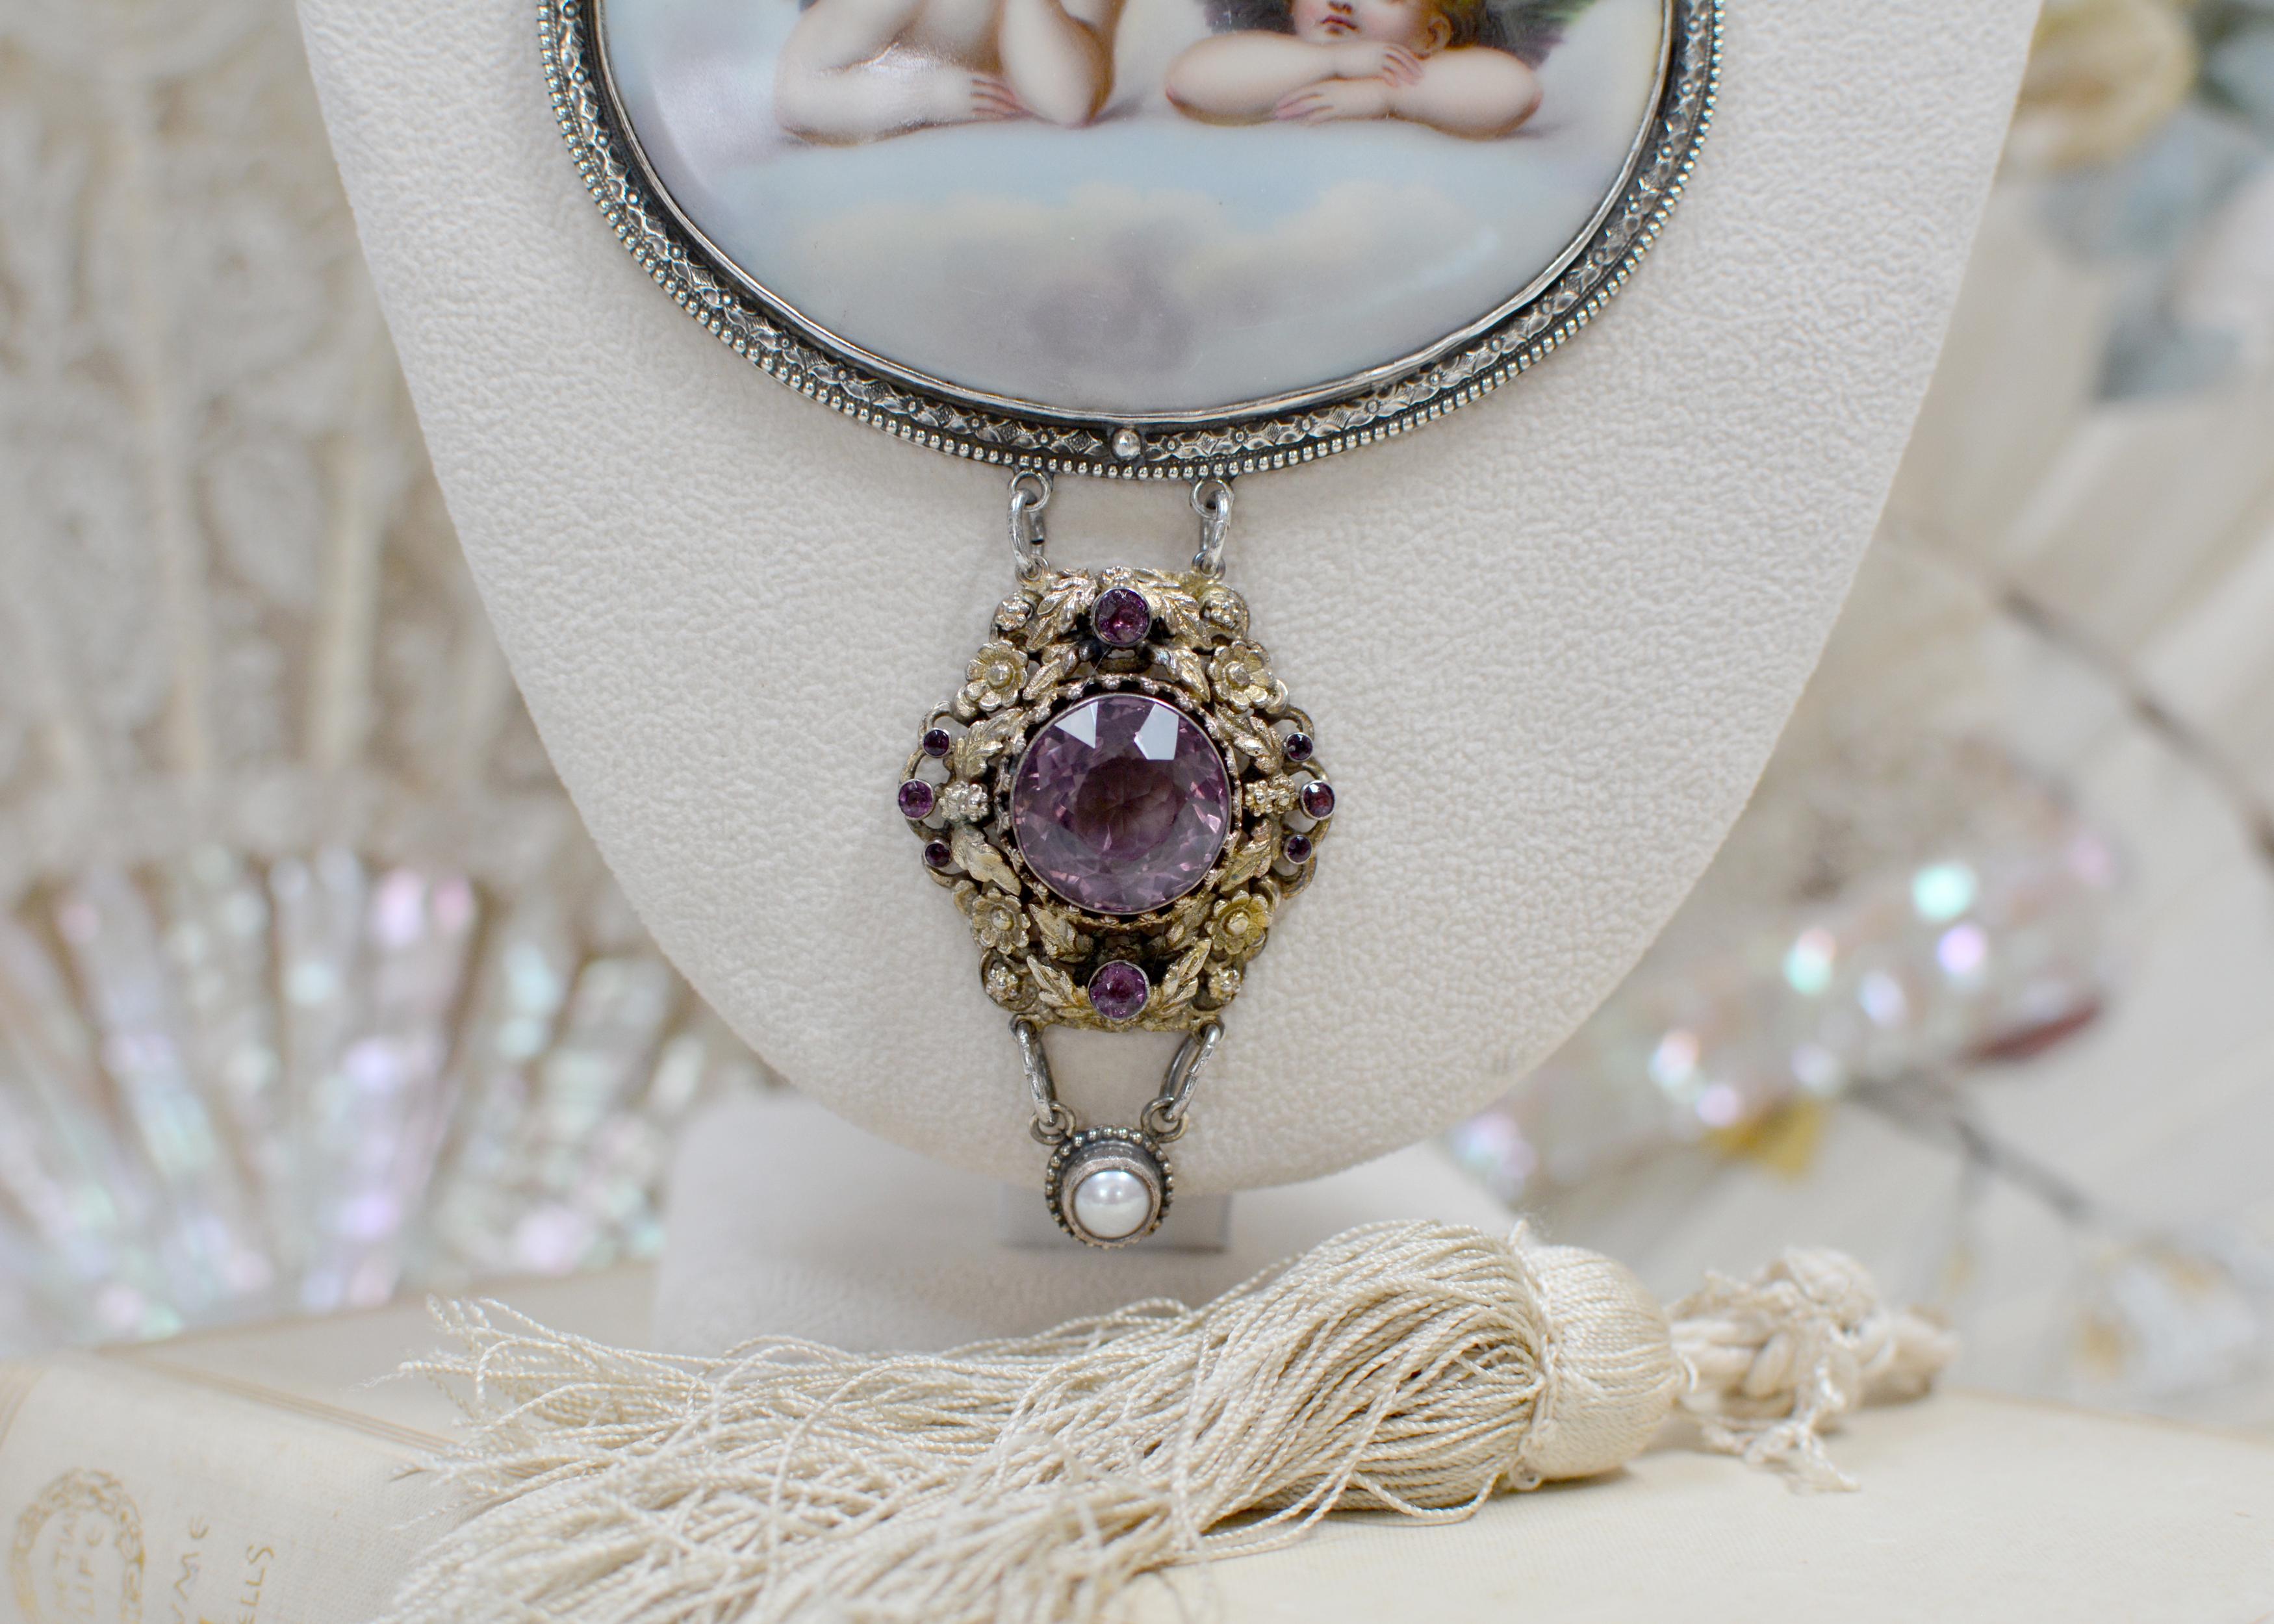 Old European Cut Jill Garber 19th Century Sistine Madonna Angels Portrait Necklace with Amethyst For Sale